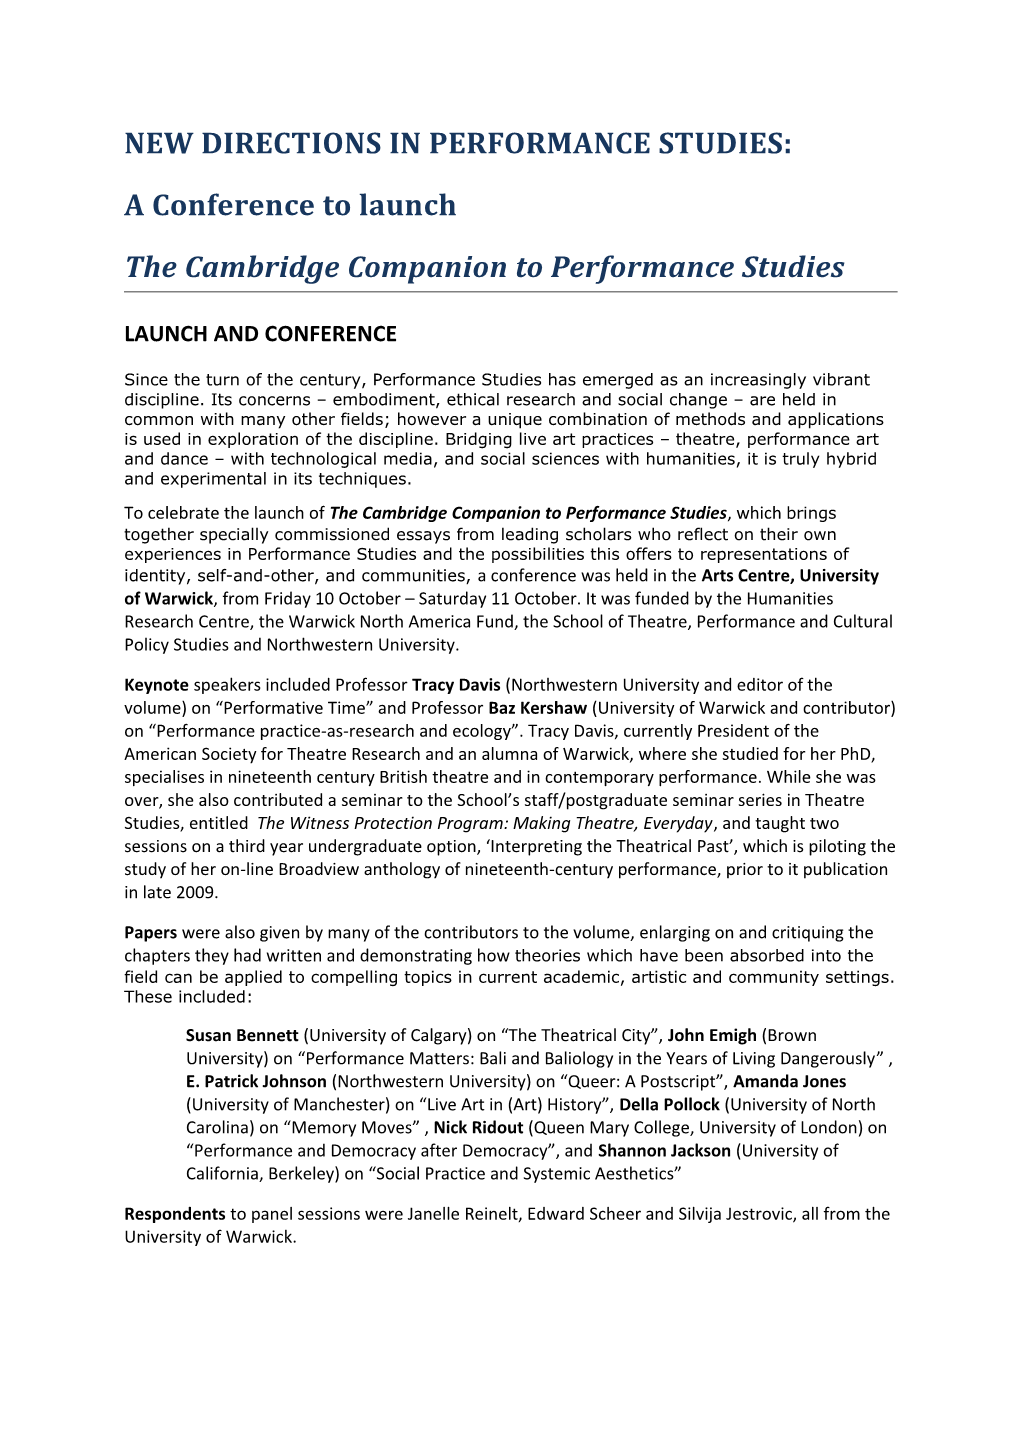 New Directions in Performance Studies